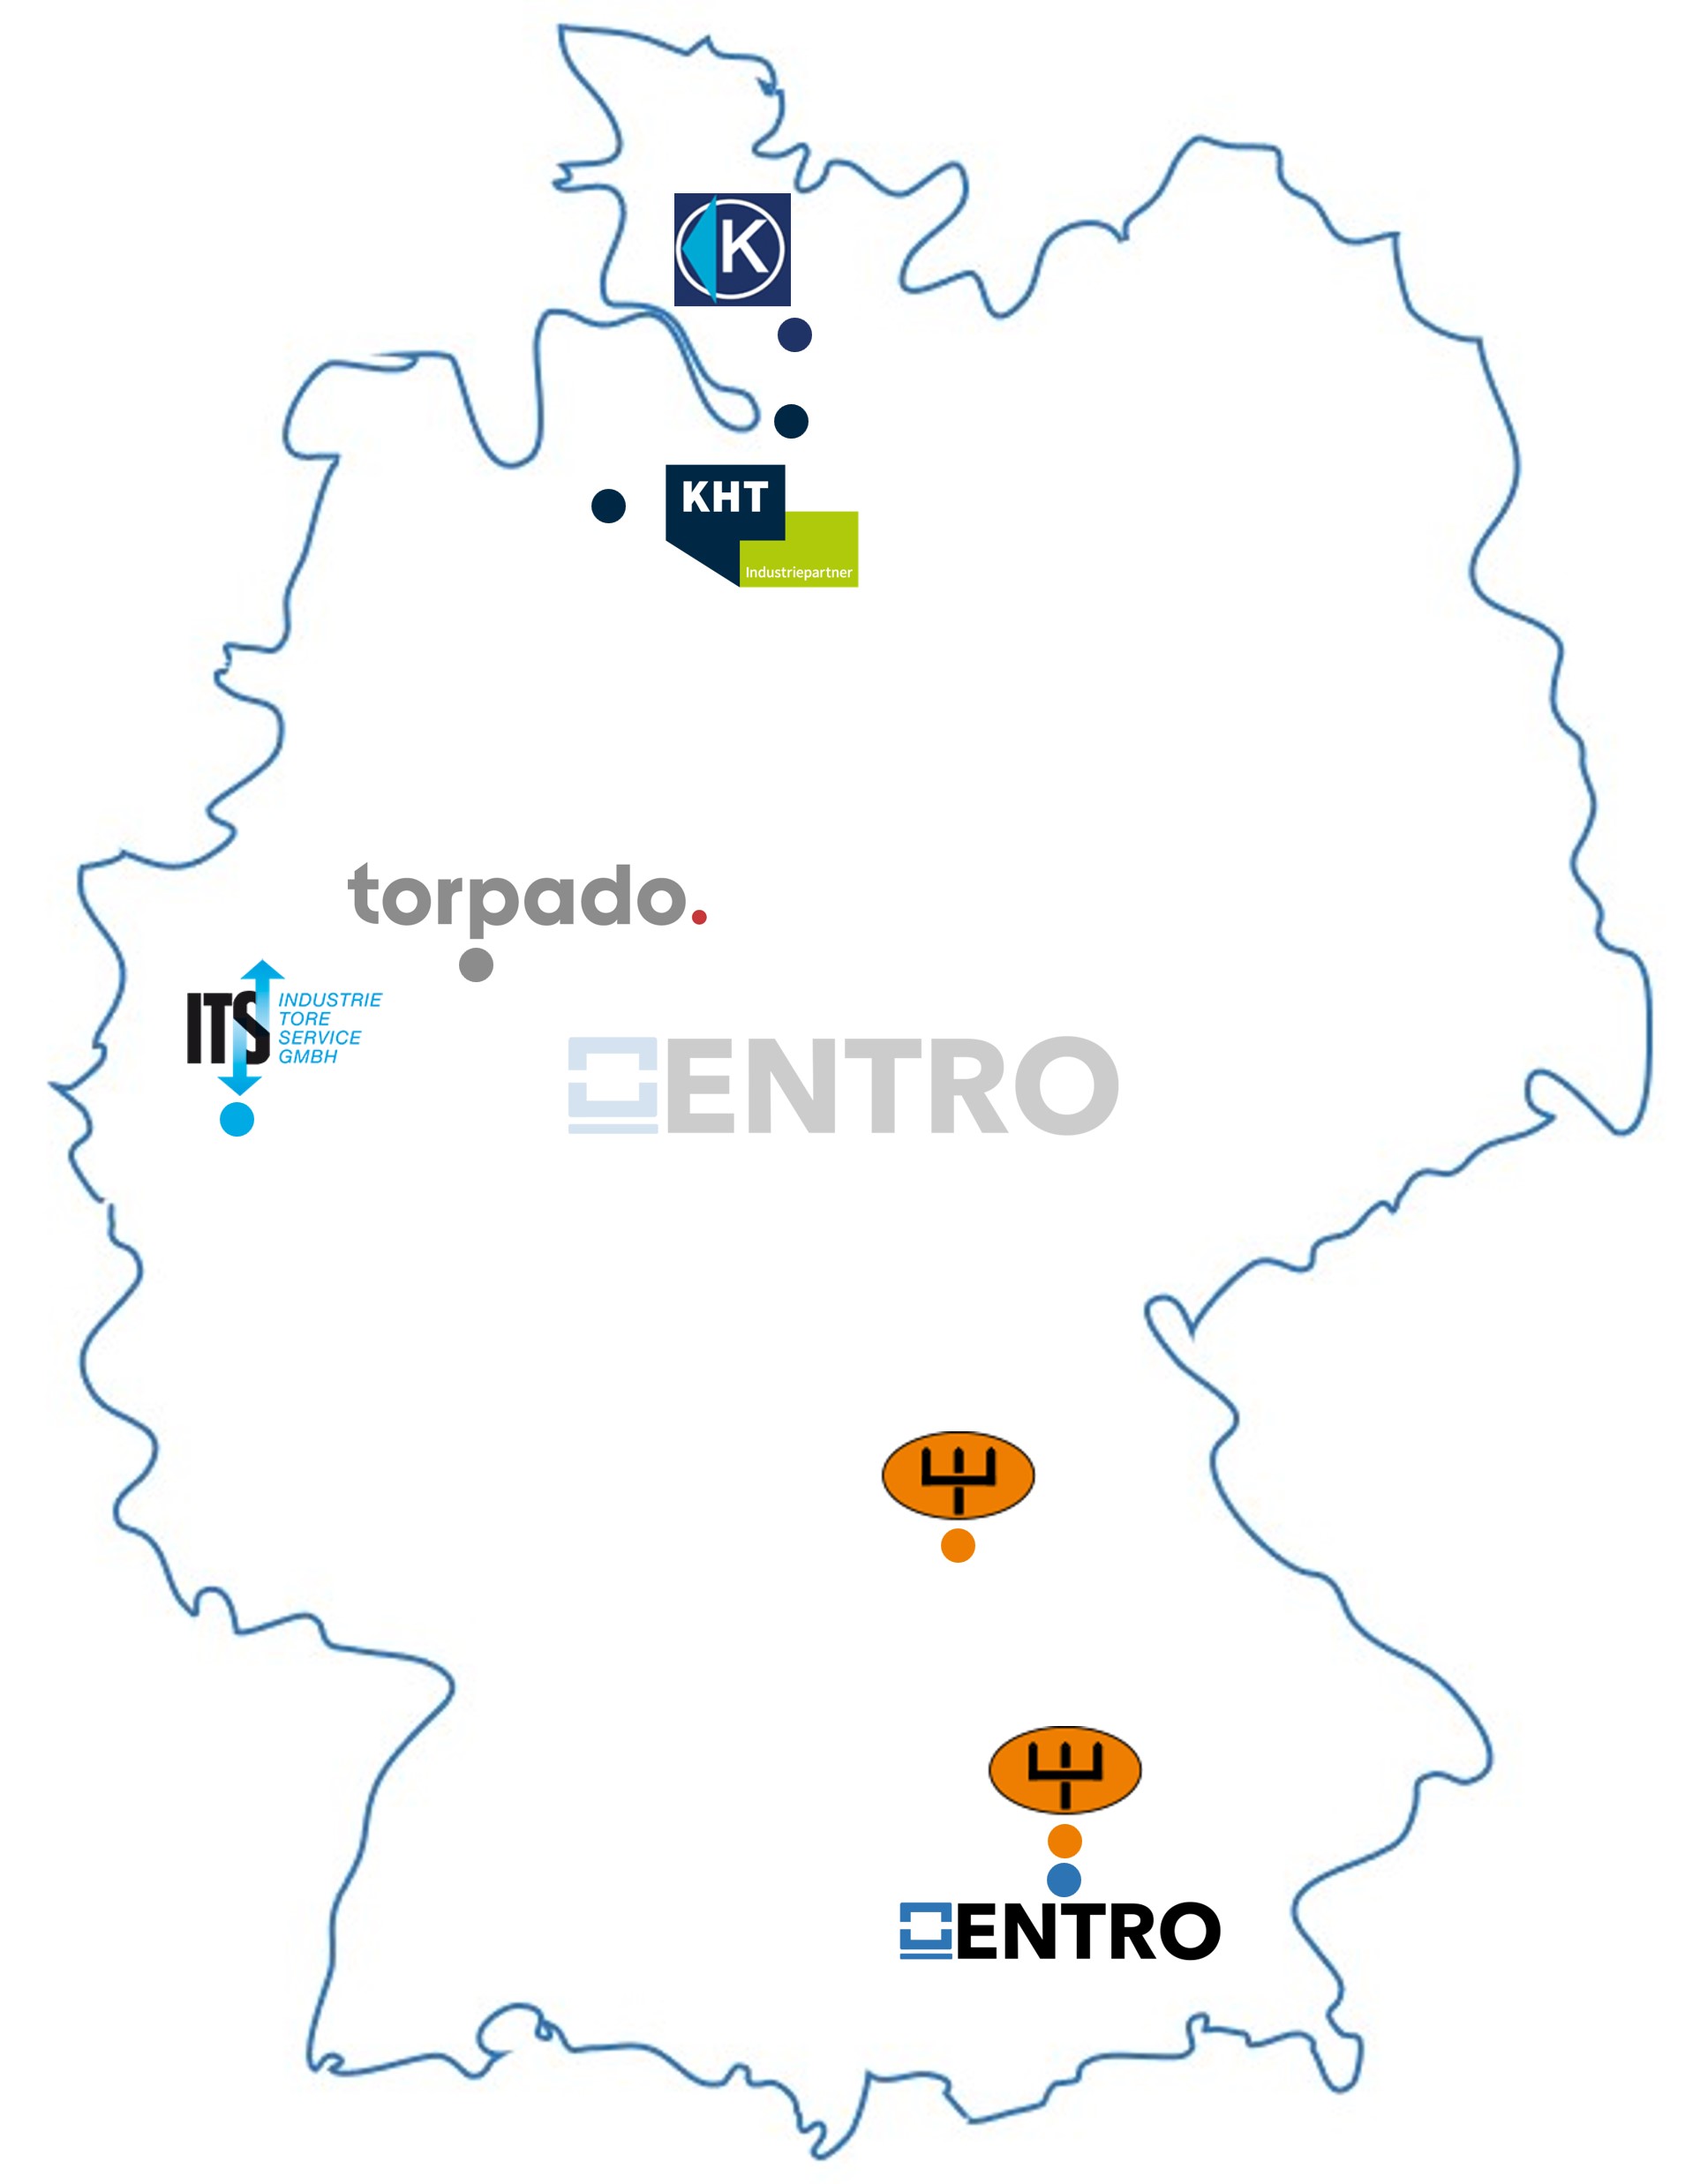 a map of Germany showing all ENTRO partner locations